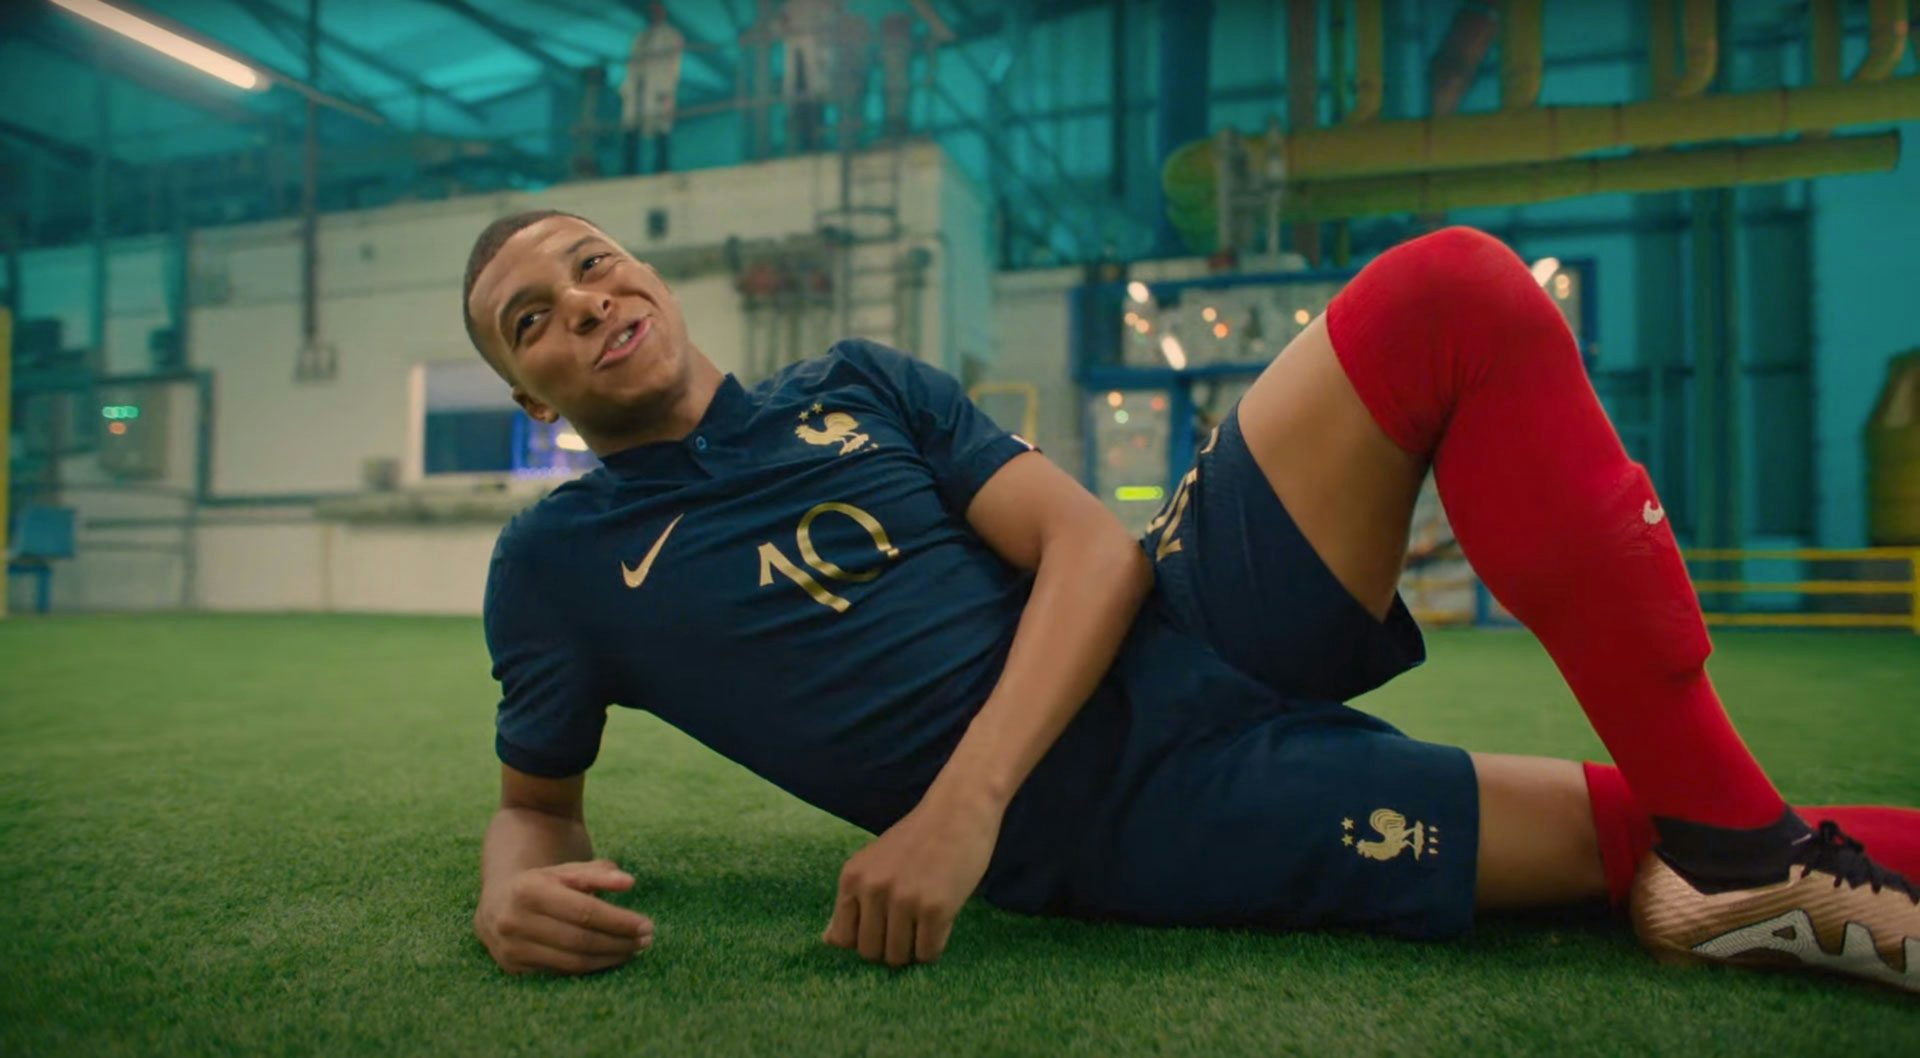 Regularidad nicotina jefe Nike enters the footballverse in its star-studded World Cup ad